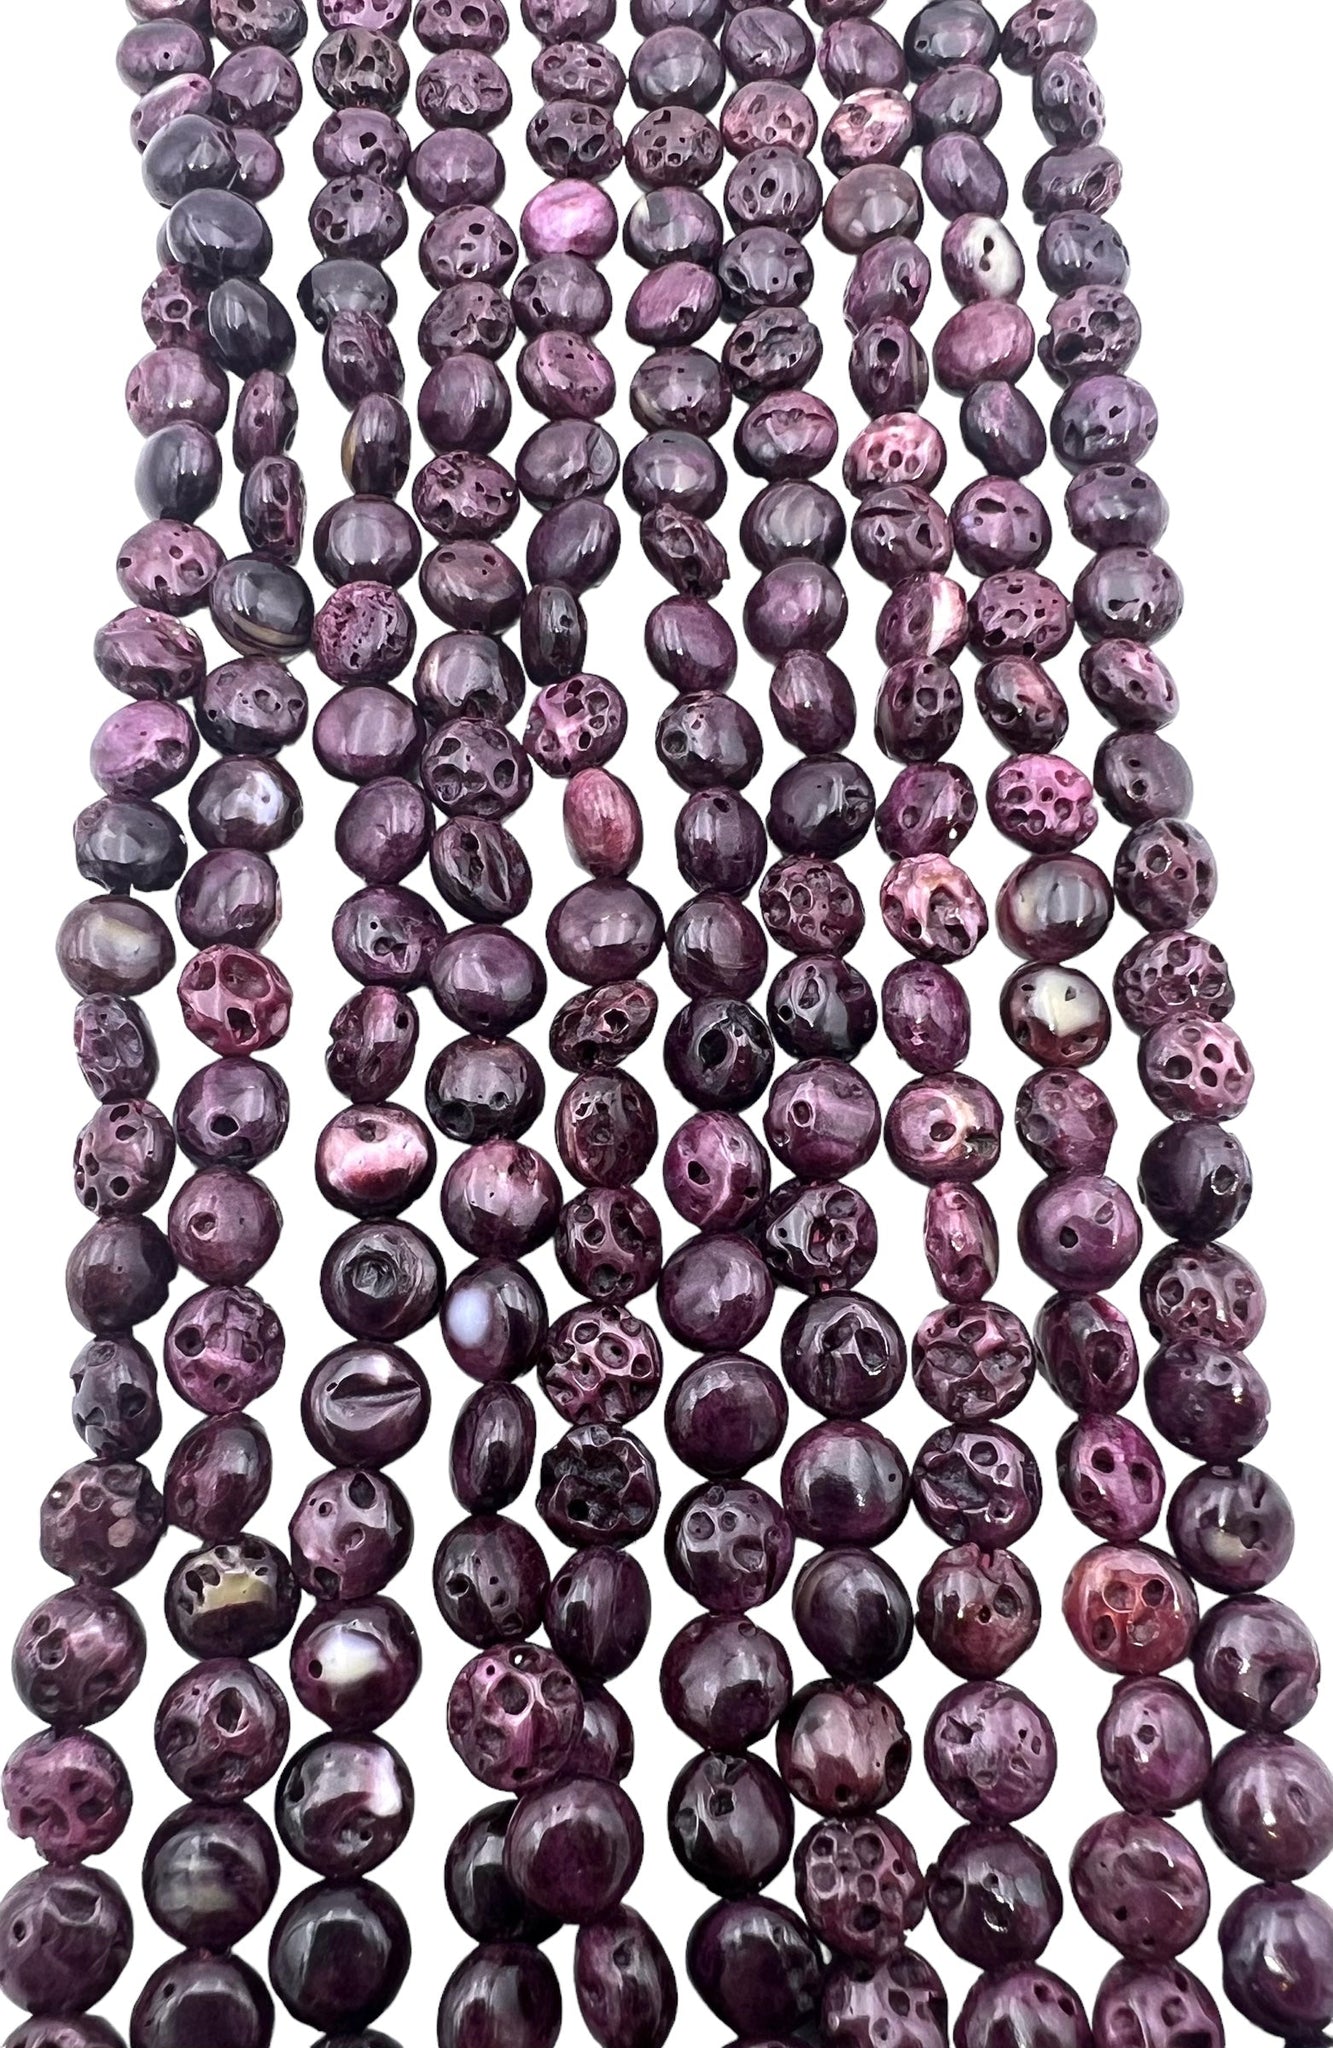 RARE Dark Purple Spiny Oyster 6mm Coin Shaped Beads, 16 inch strand